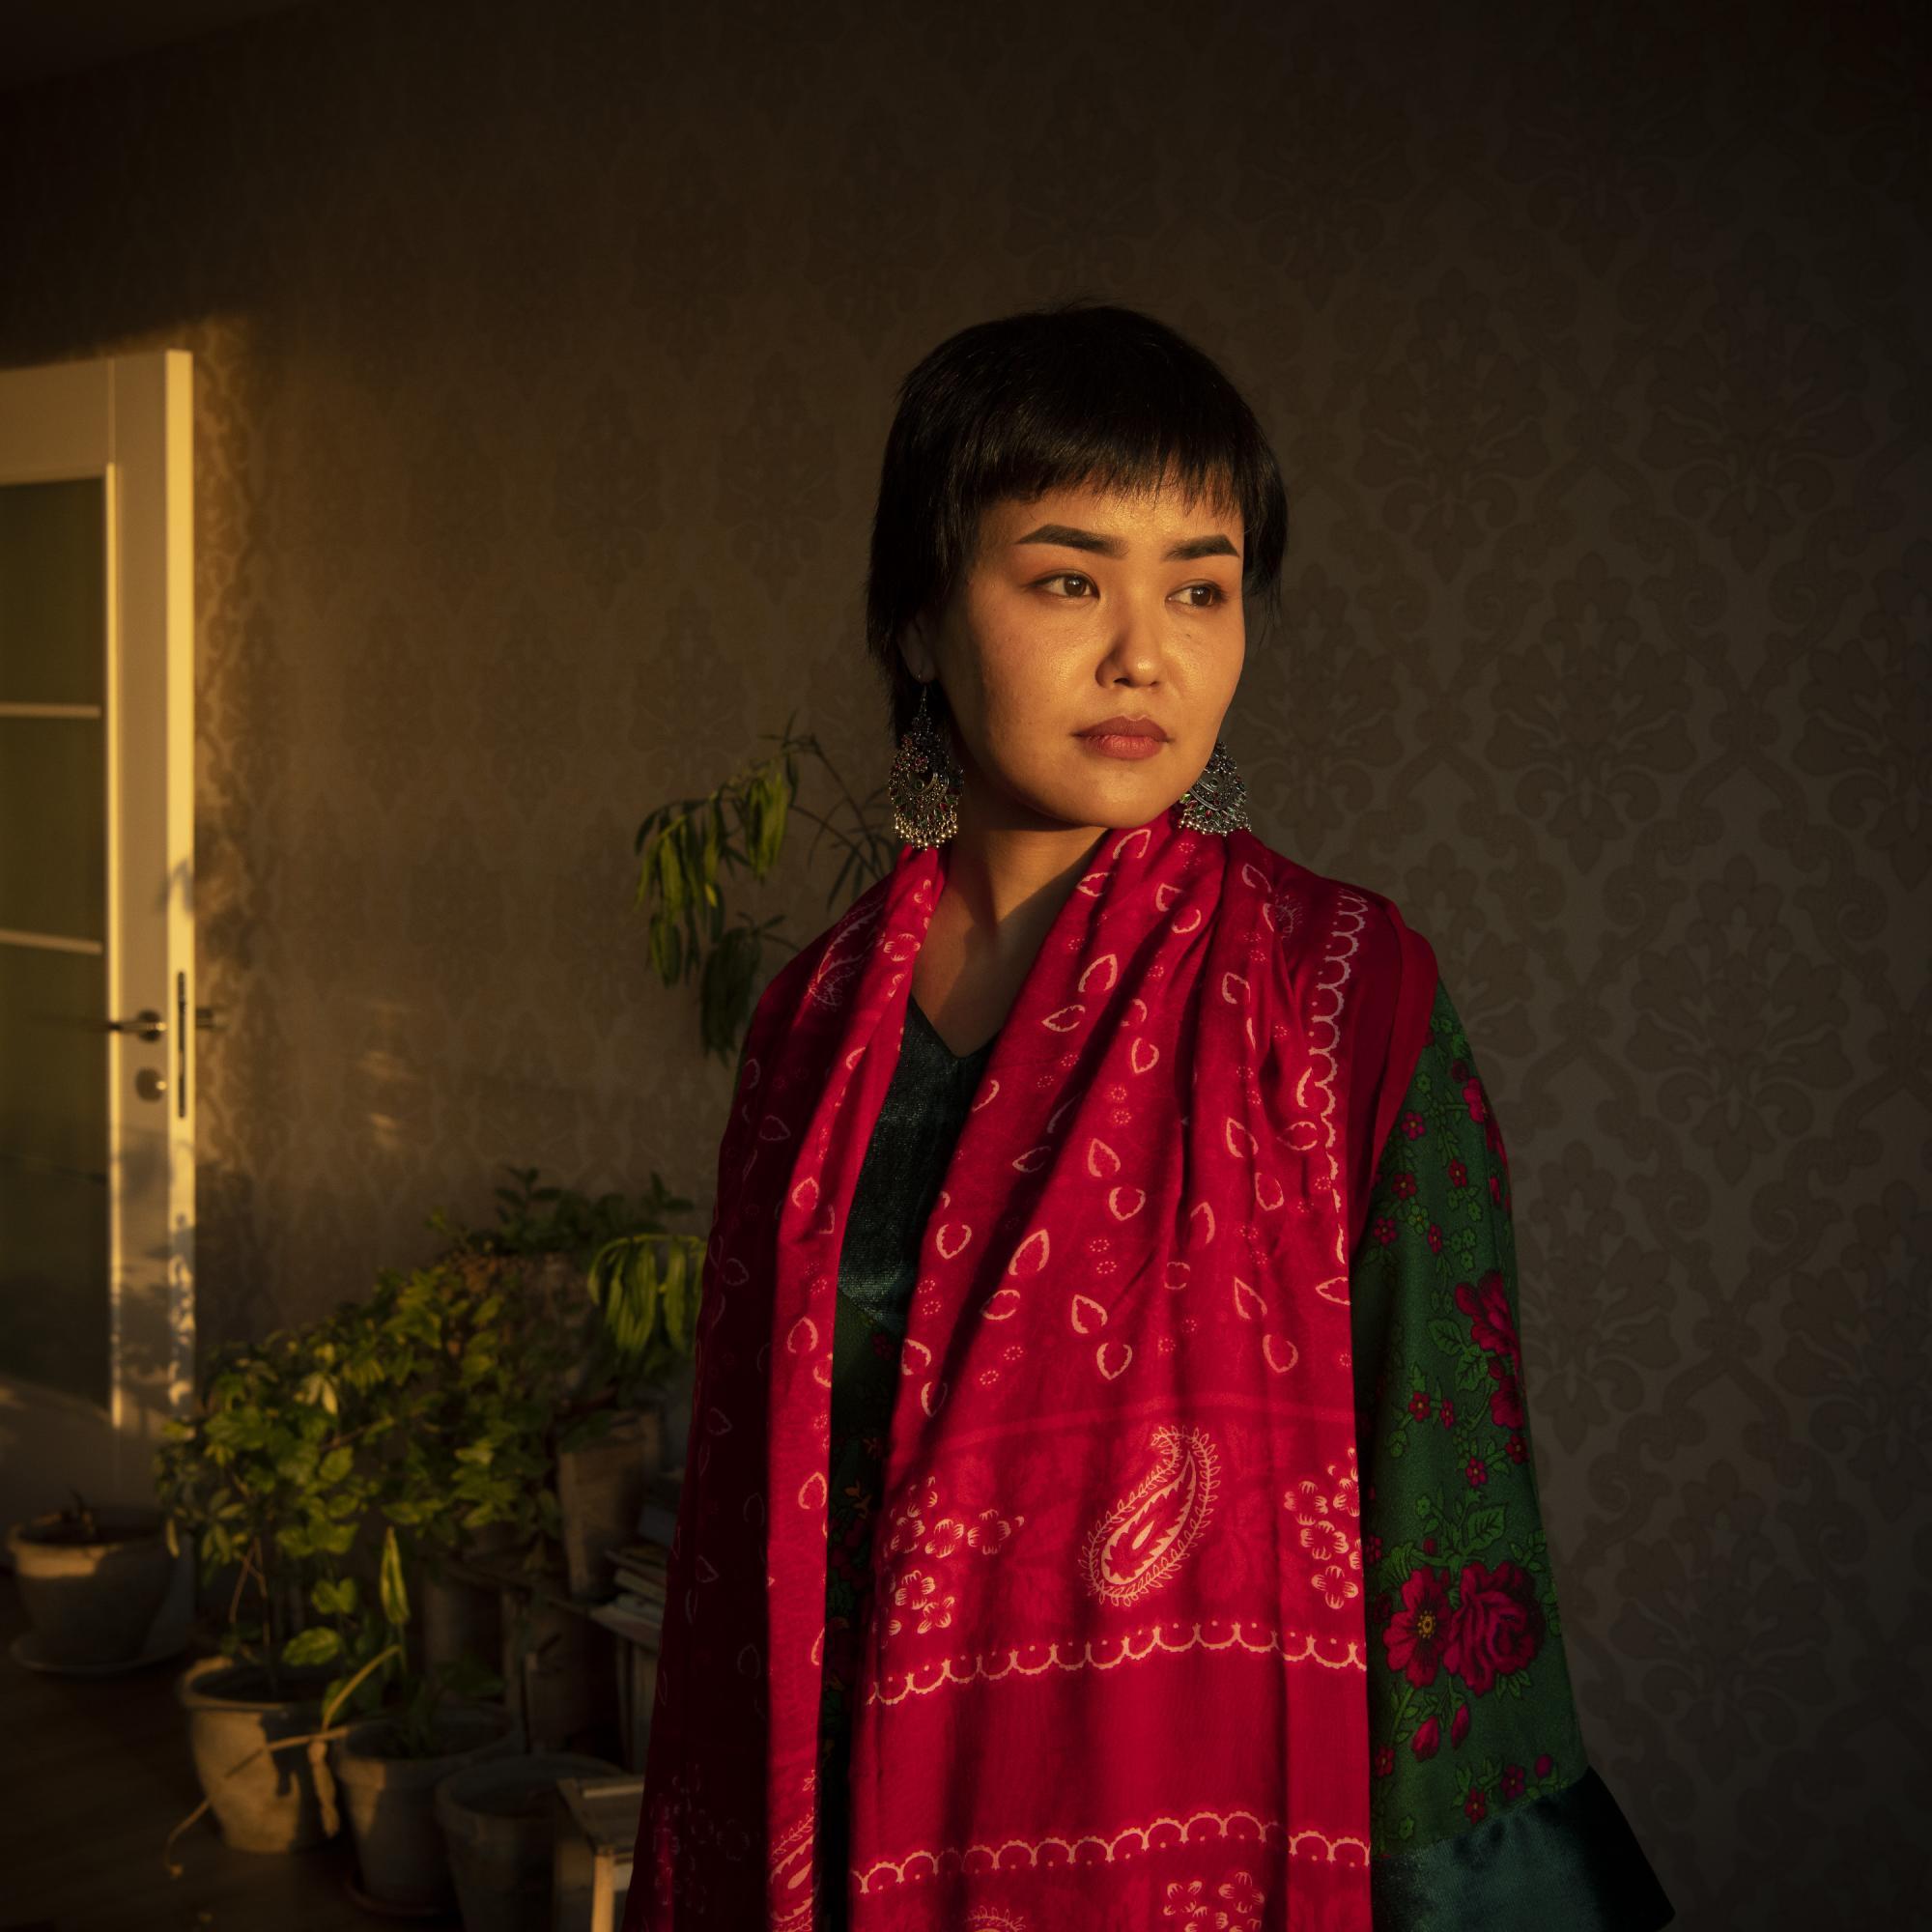 Maine Media Announces Craig Easton as the Recipient of the 2023 Arnold Newman Prize - Kabul, Kabul, Afghanistan, 20220926 - Loss Piles on Loss for Afghan Women by Kiana Hayeri, 2023